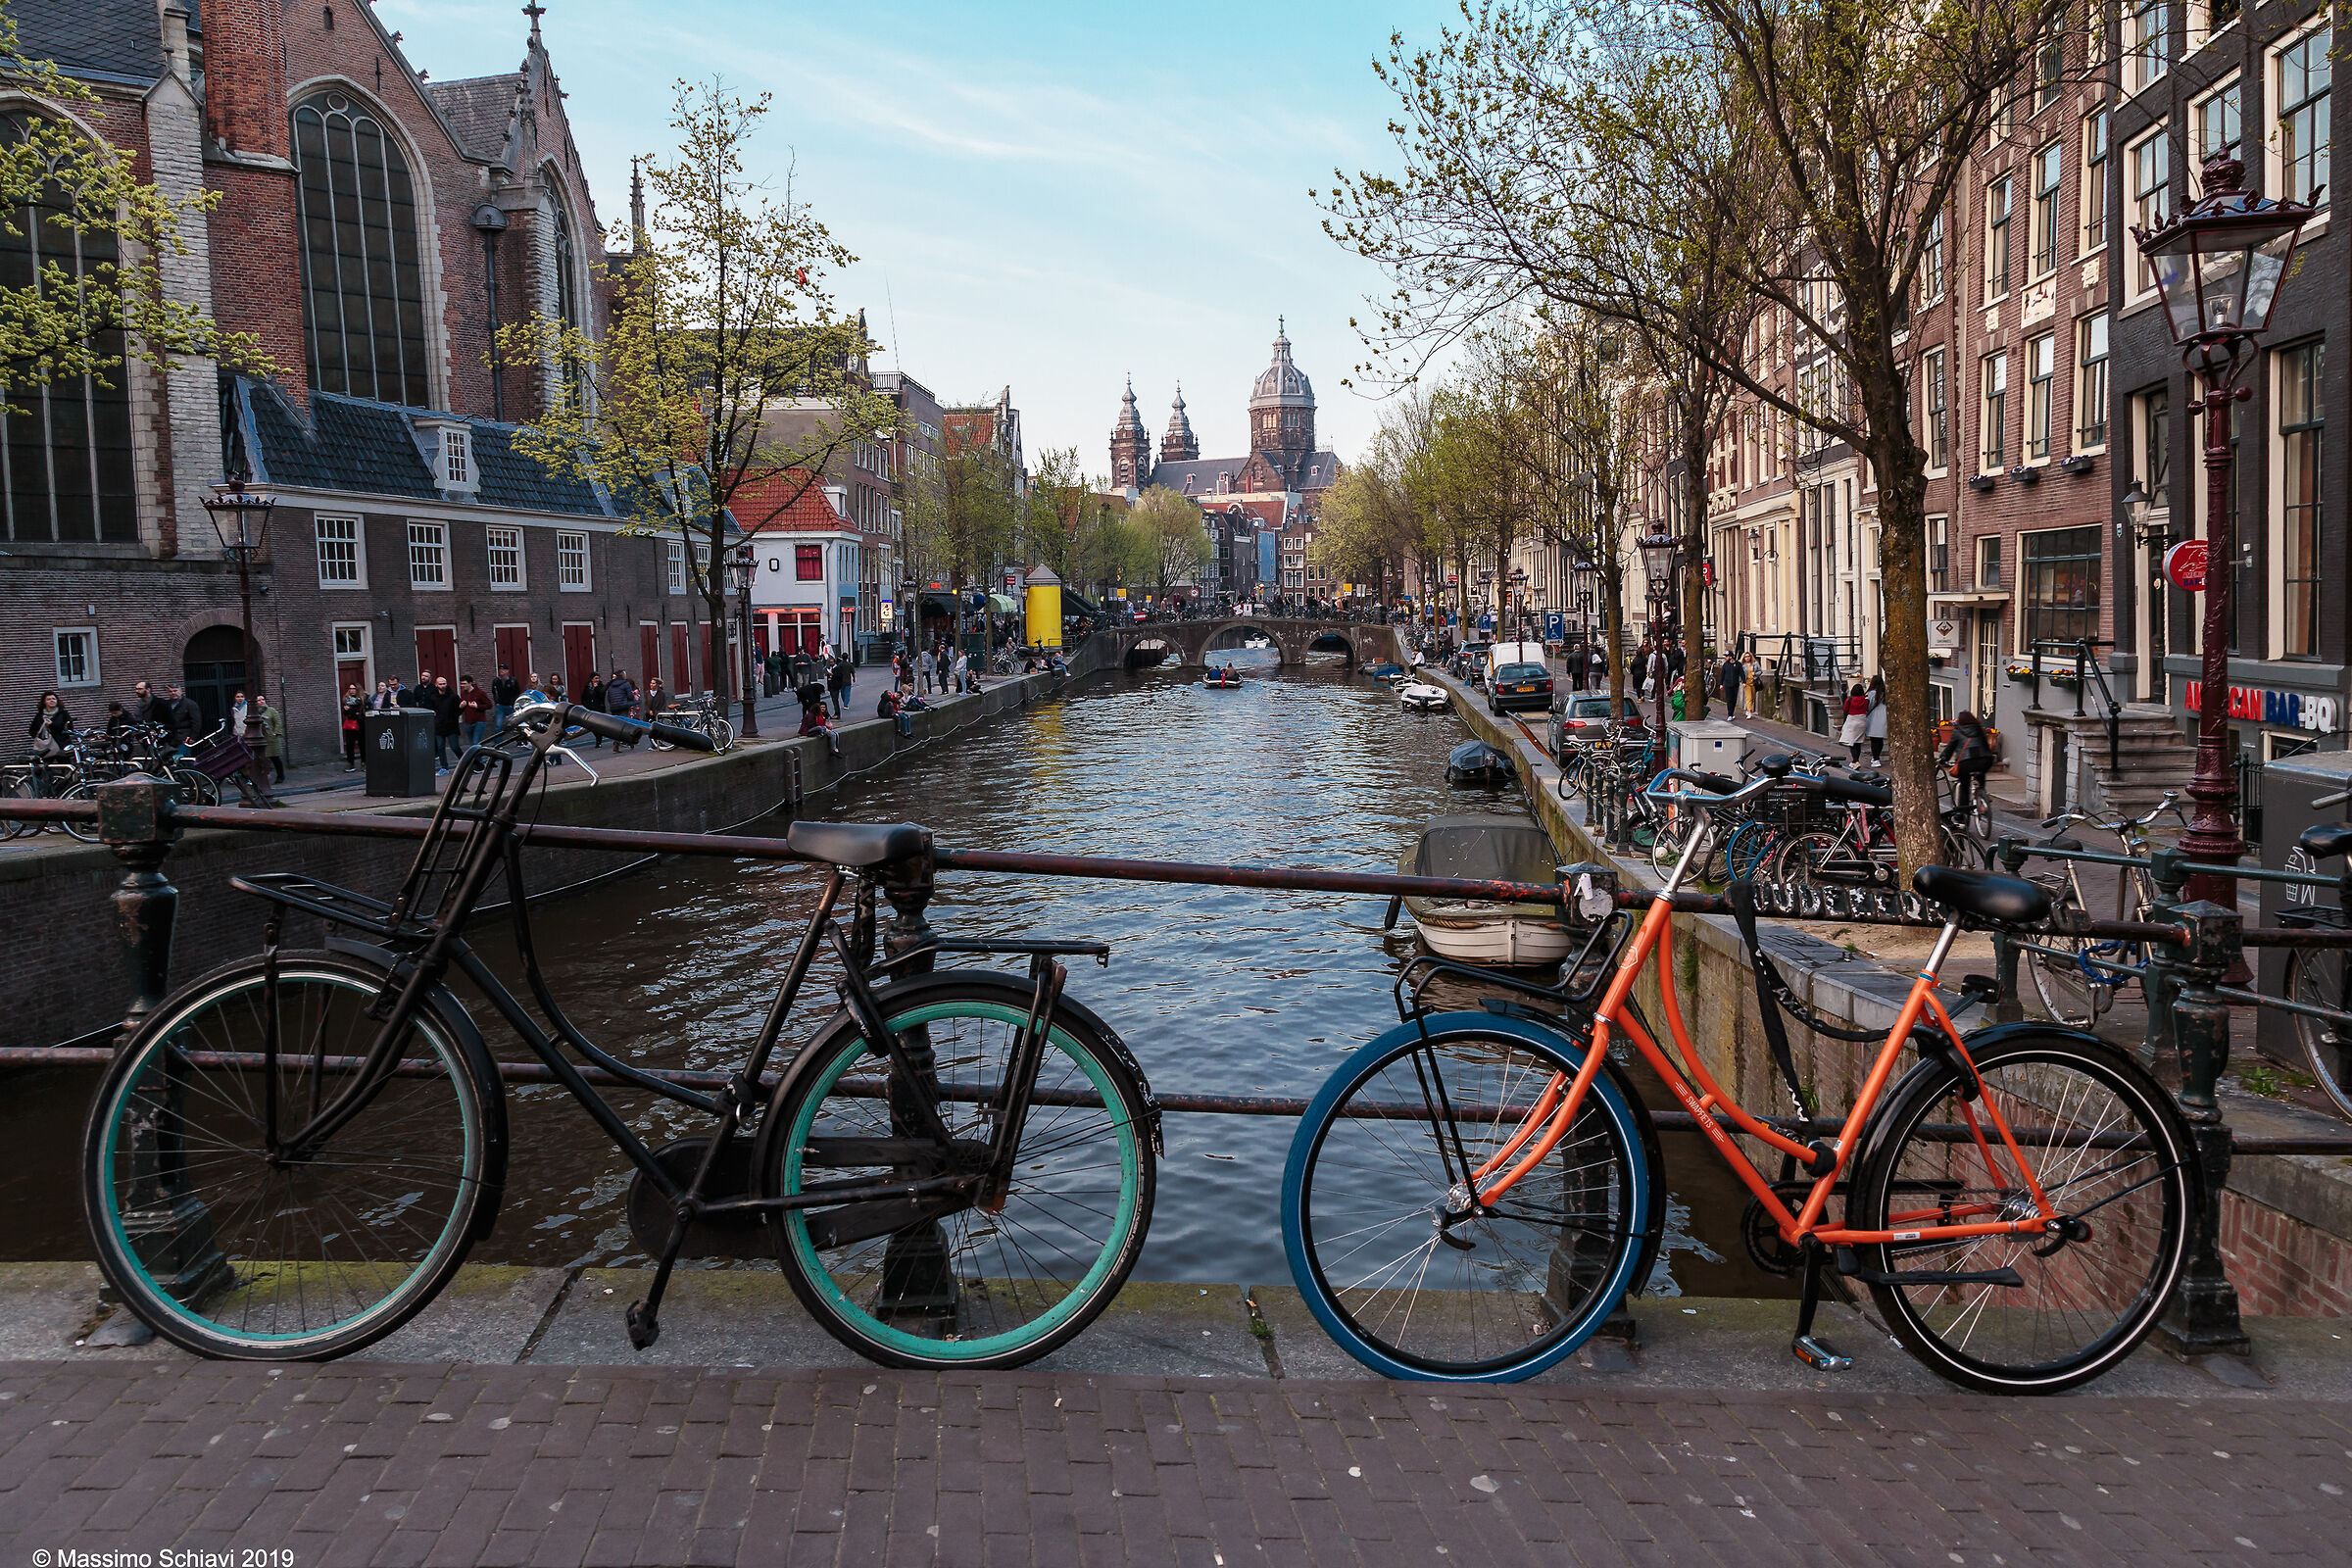 Canals and bicycles in Amsterdam....